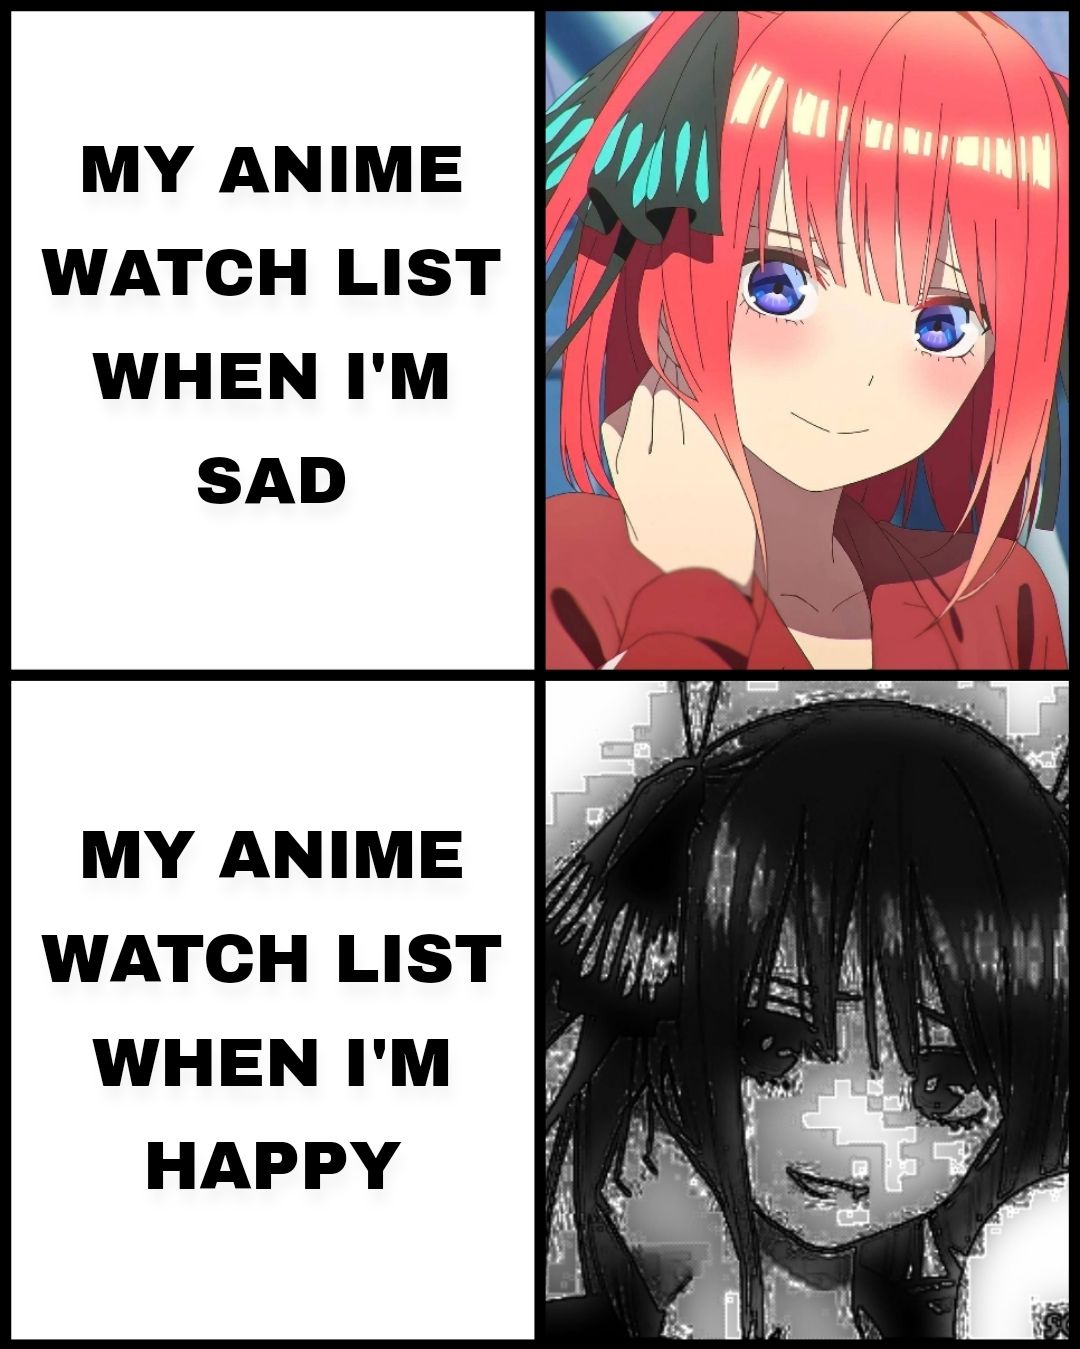 Wholesome Anime is good when you're sad